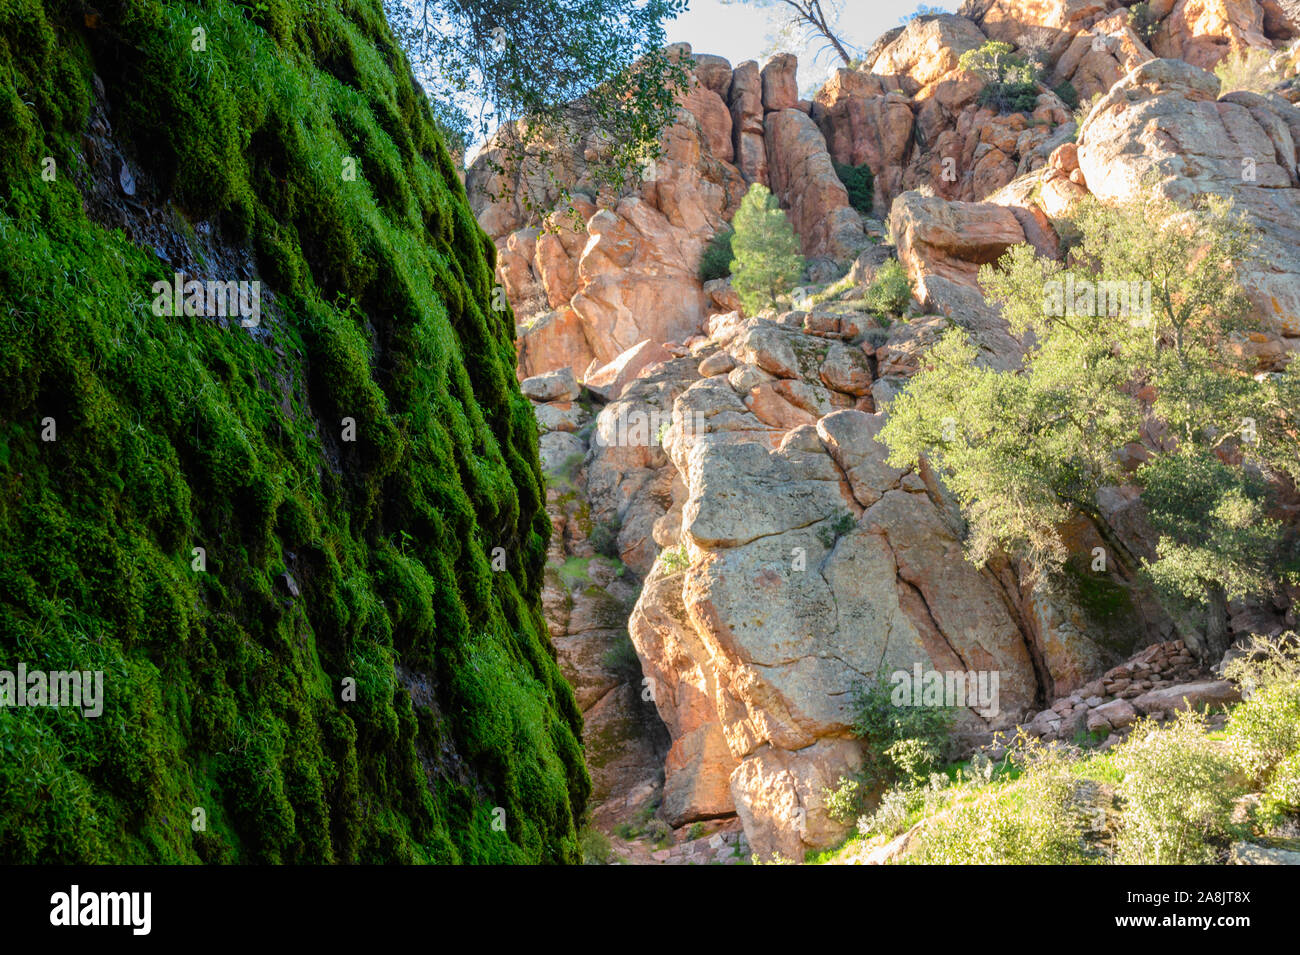 Mossy Boulder Alongside Pinnacles Rock Formations in California's central valley Stock Photo